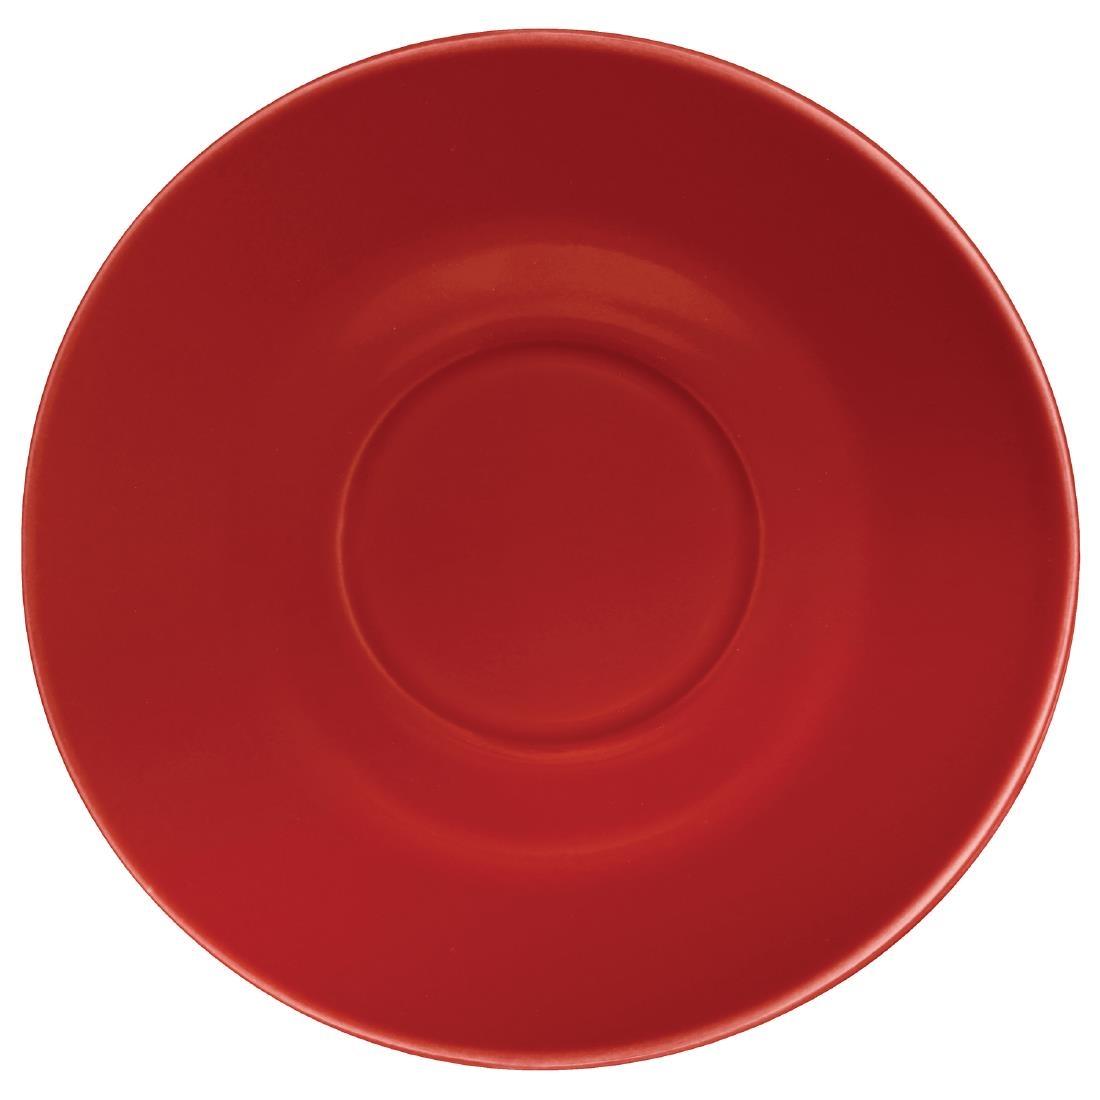 Olympia Cafe Saucers Red 158mm (Pack of 12) - GL047  - 1